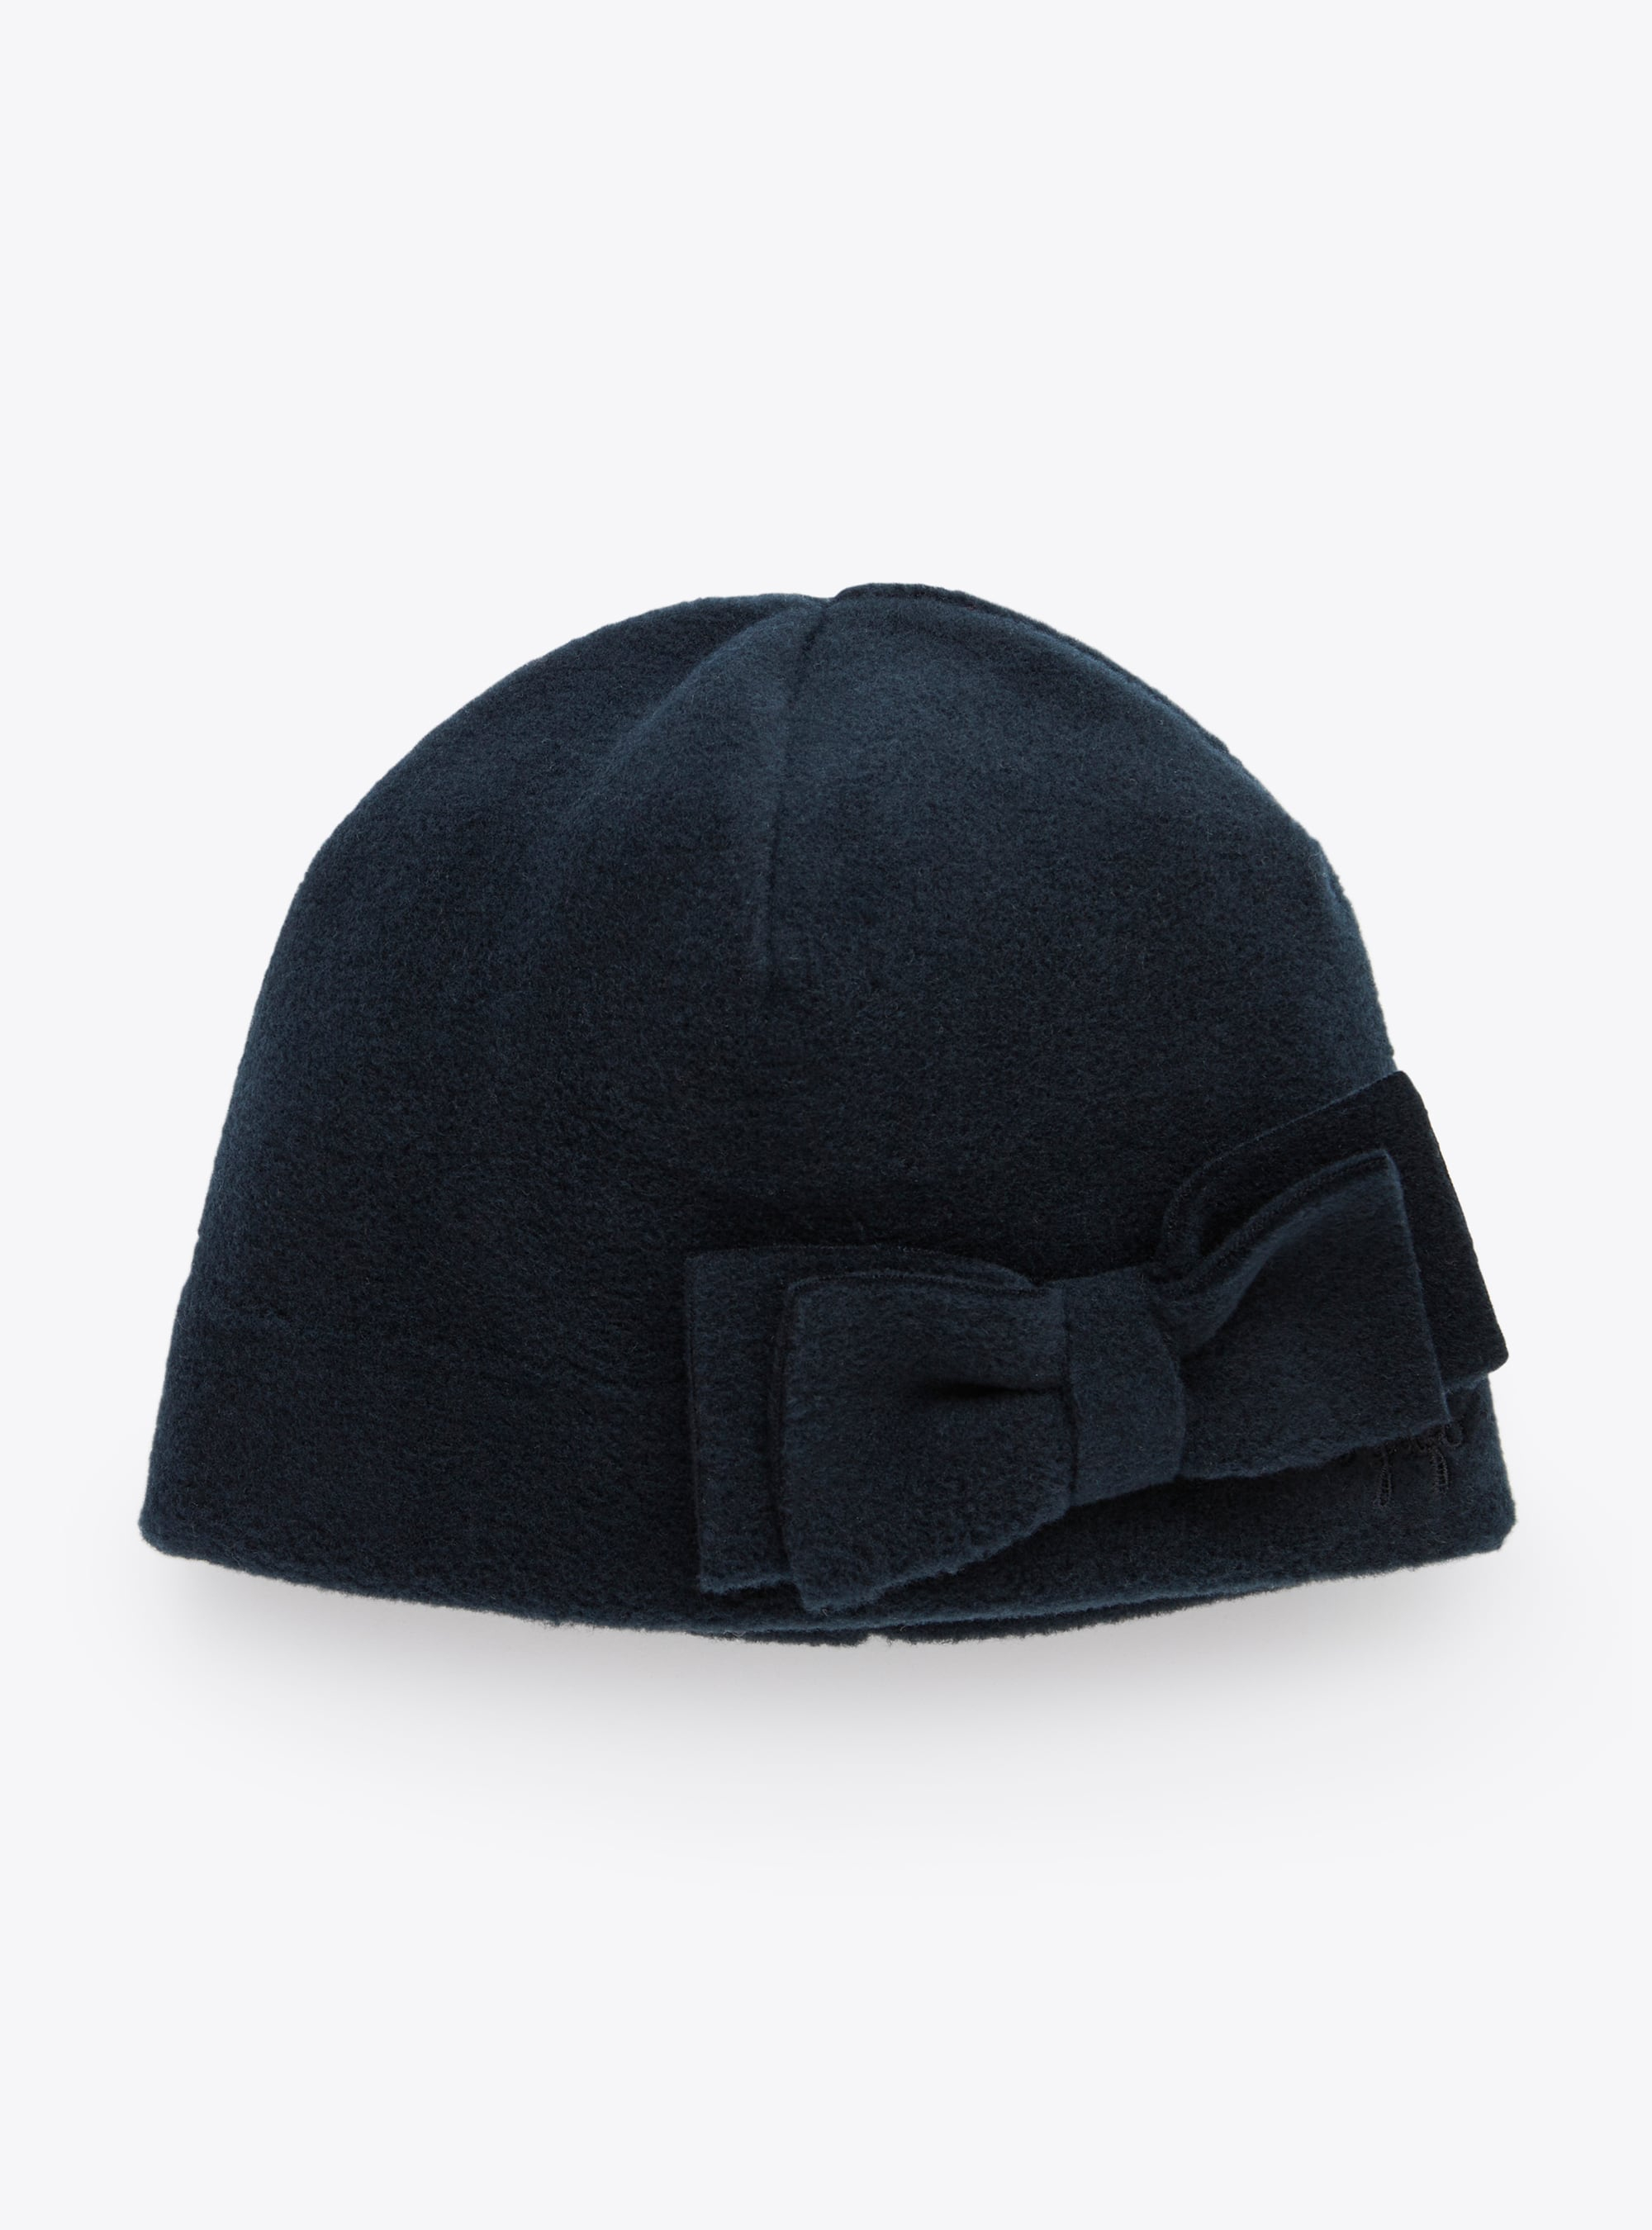 Blue fleece hat with bow detail - Accessories - Il Gufo